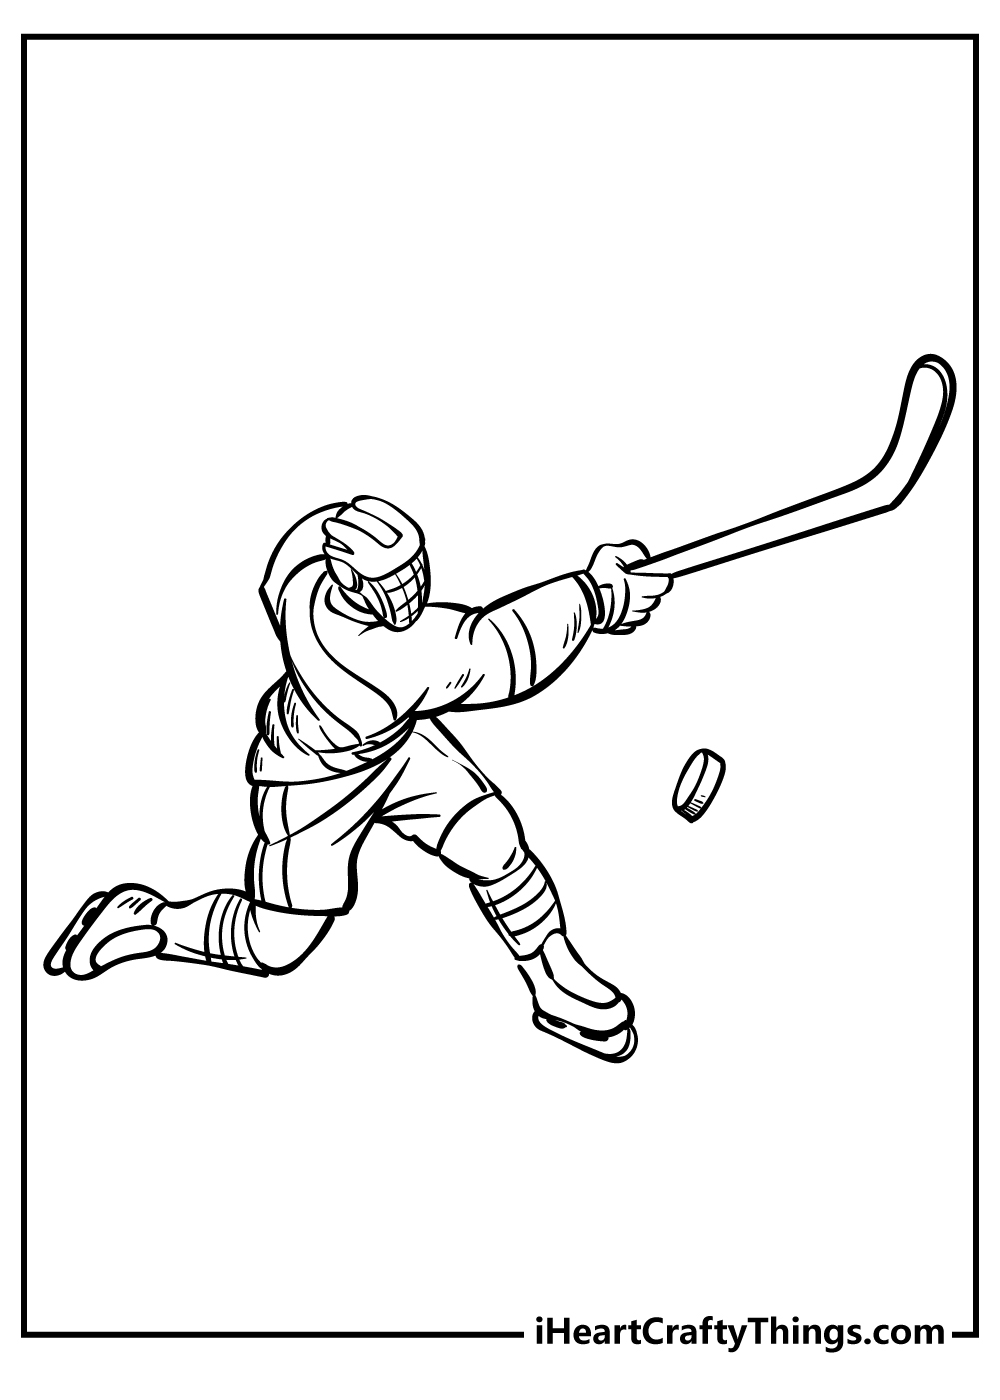 Hockey Coloring Pages free pdf download